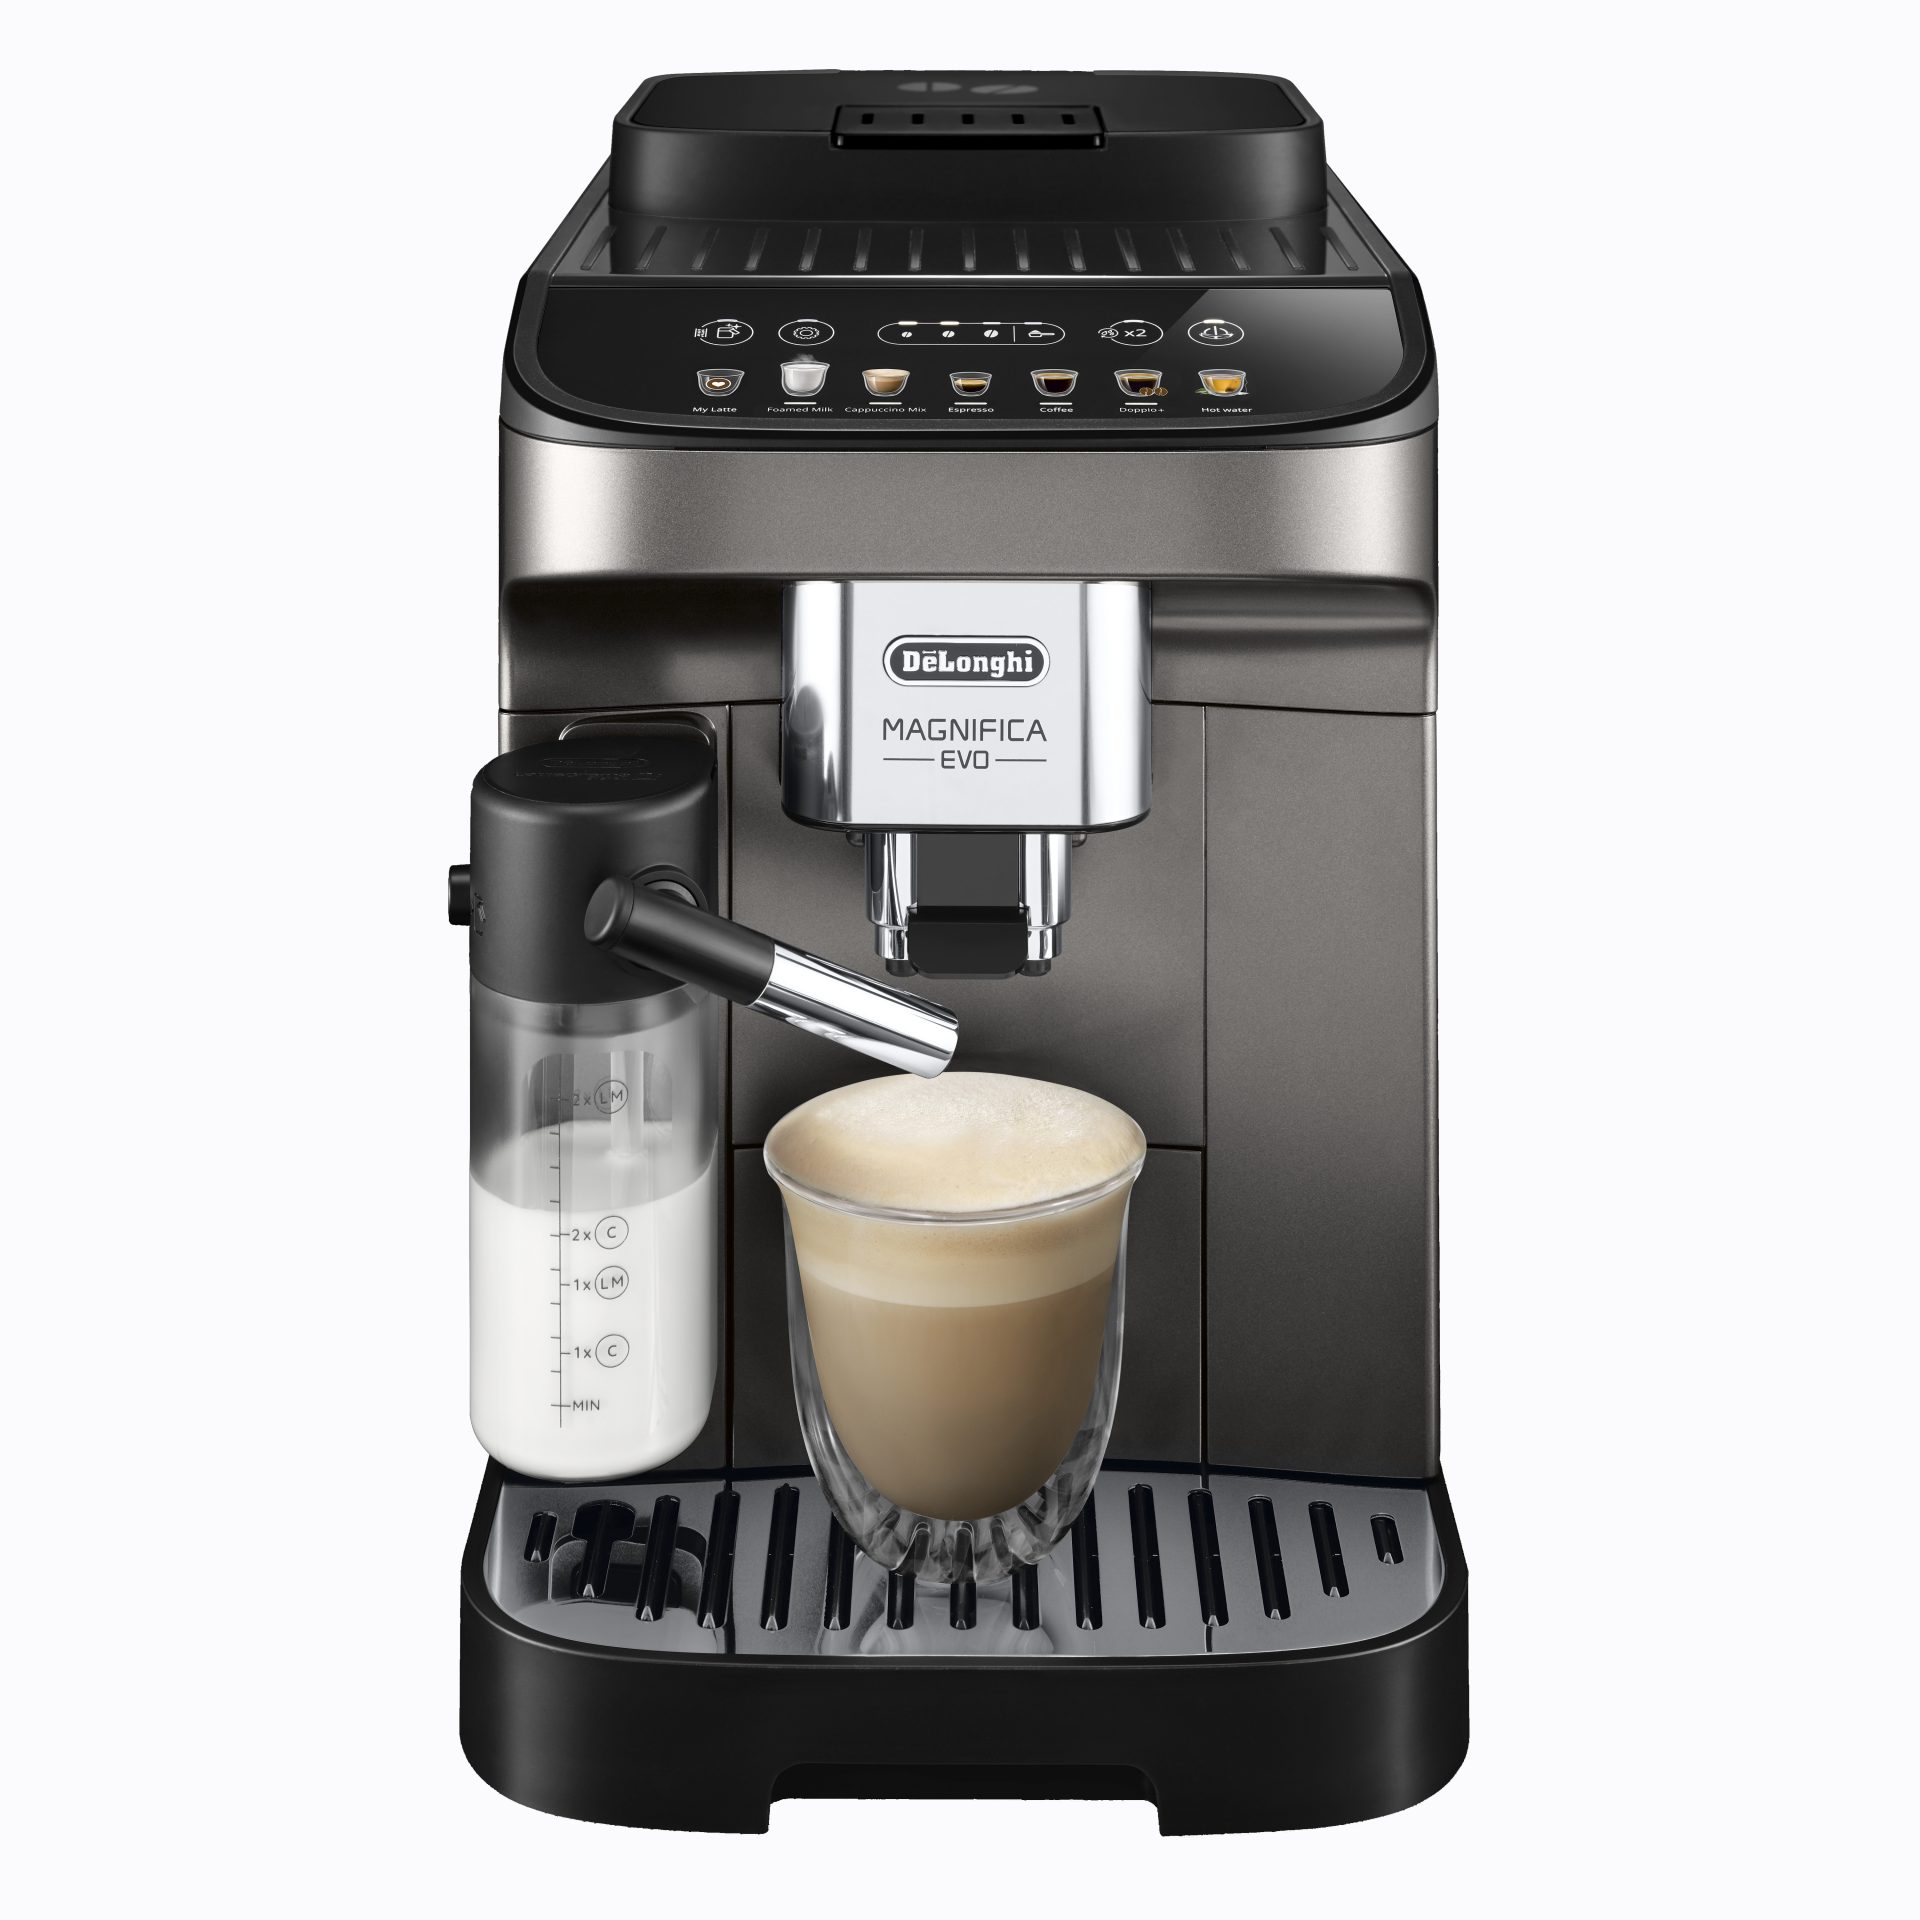 De'Longhi Magnifica Evo front shot with milk frother and cappuccino cup